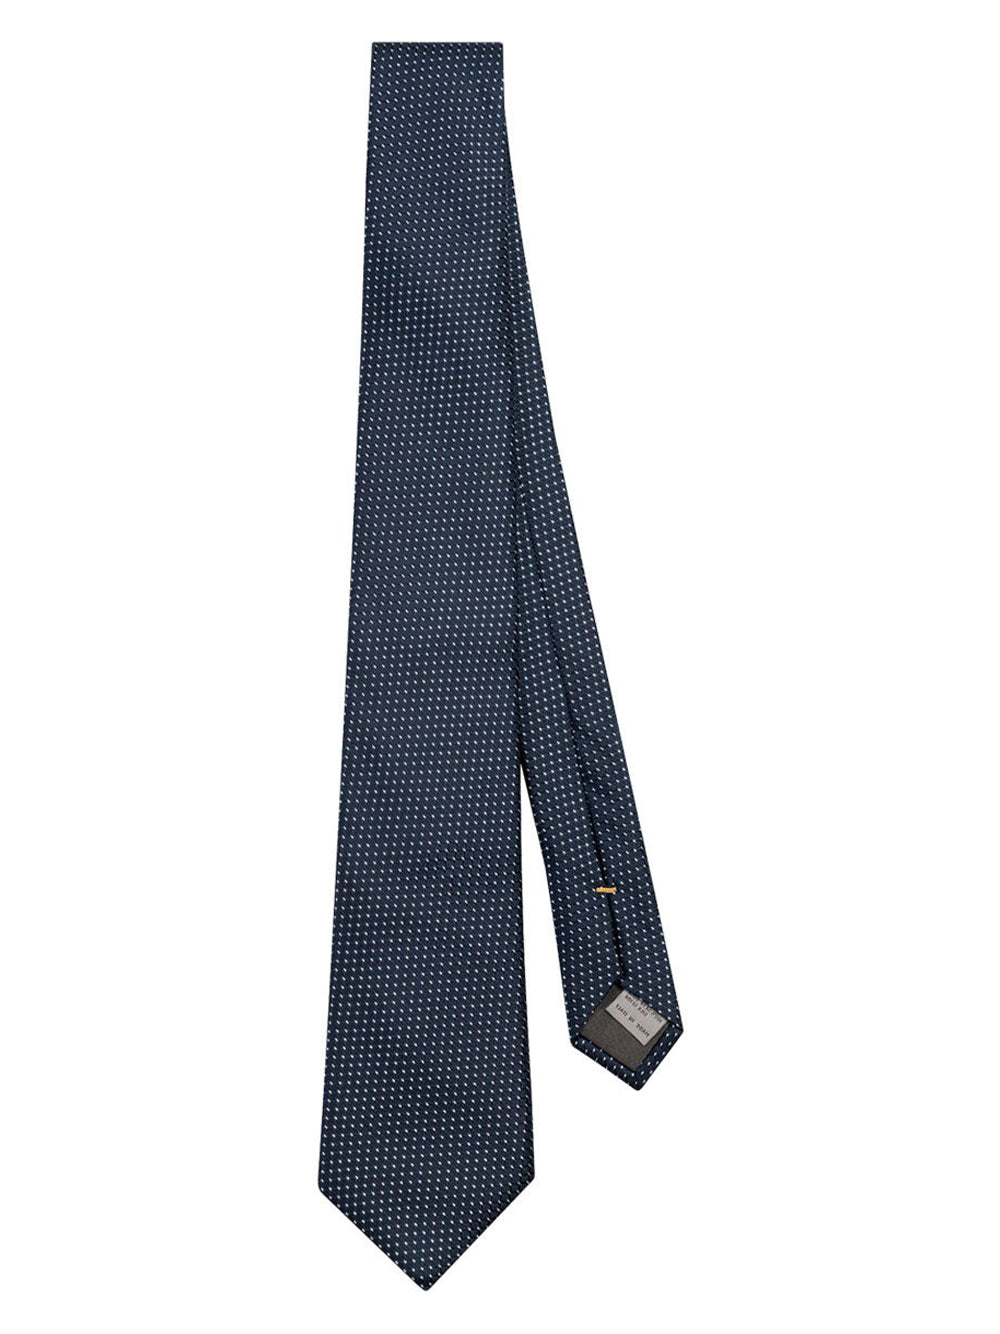 Silk tie with dots and checks